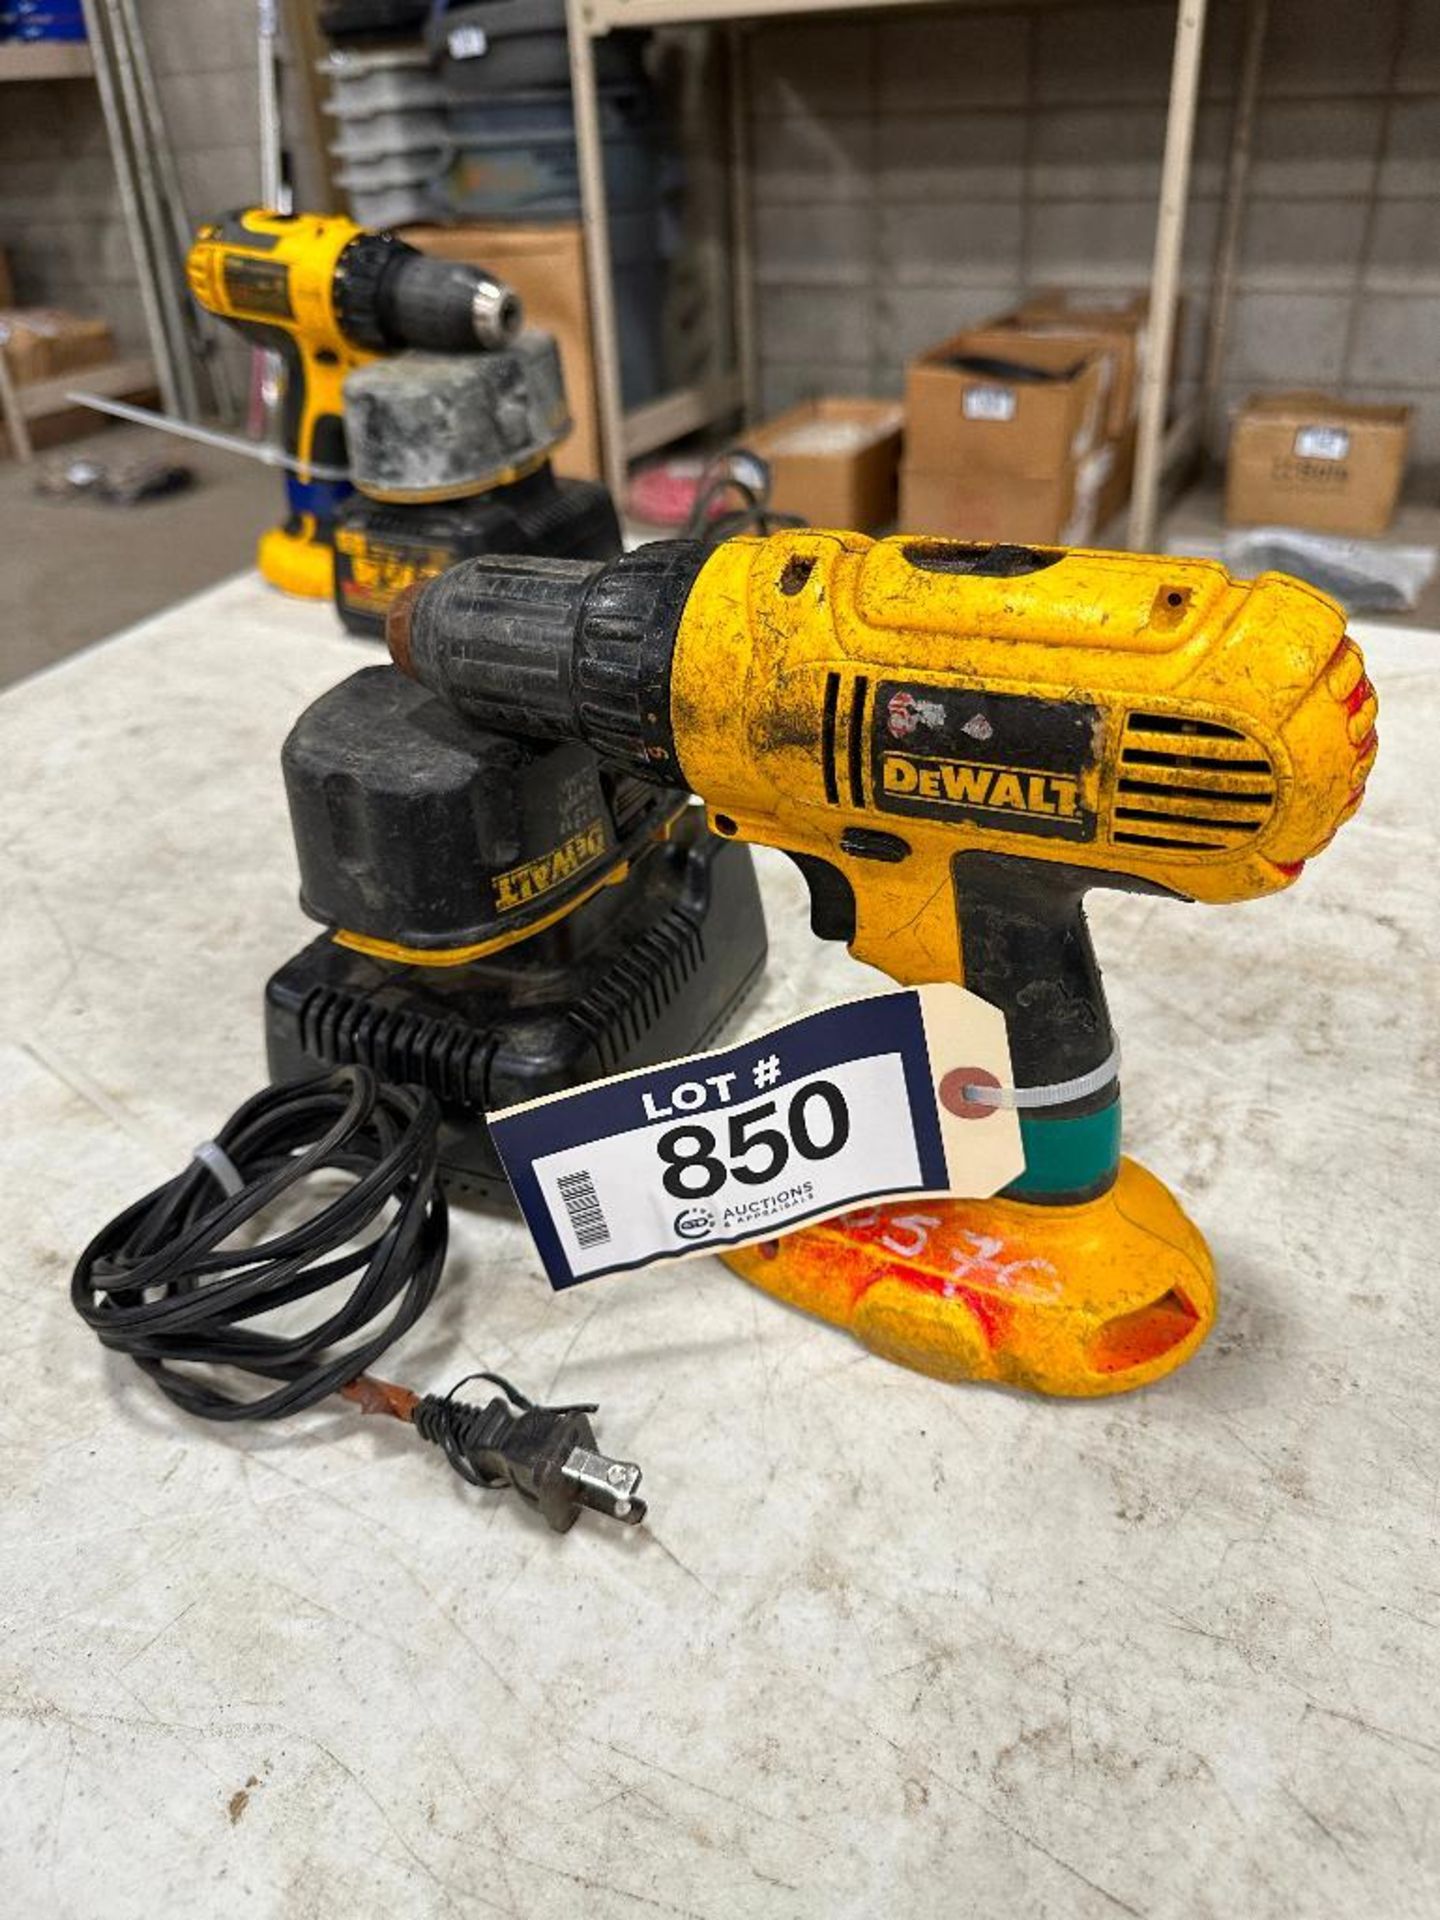 DeWalt 18V DC759 Cordless Drill w/ Battery and Charger - Image 3 of 5